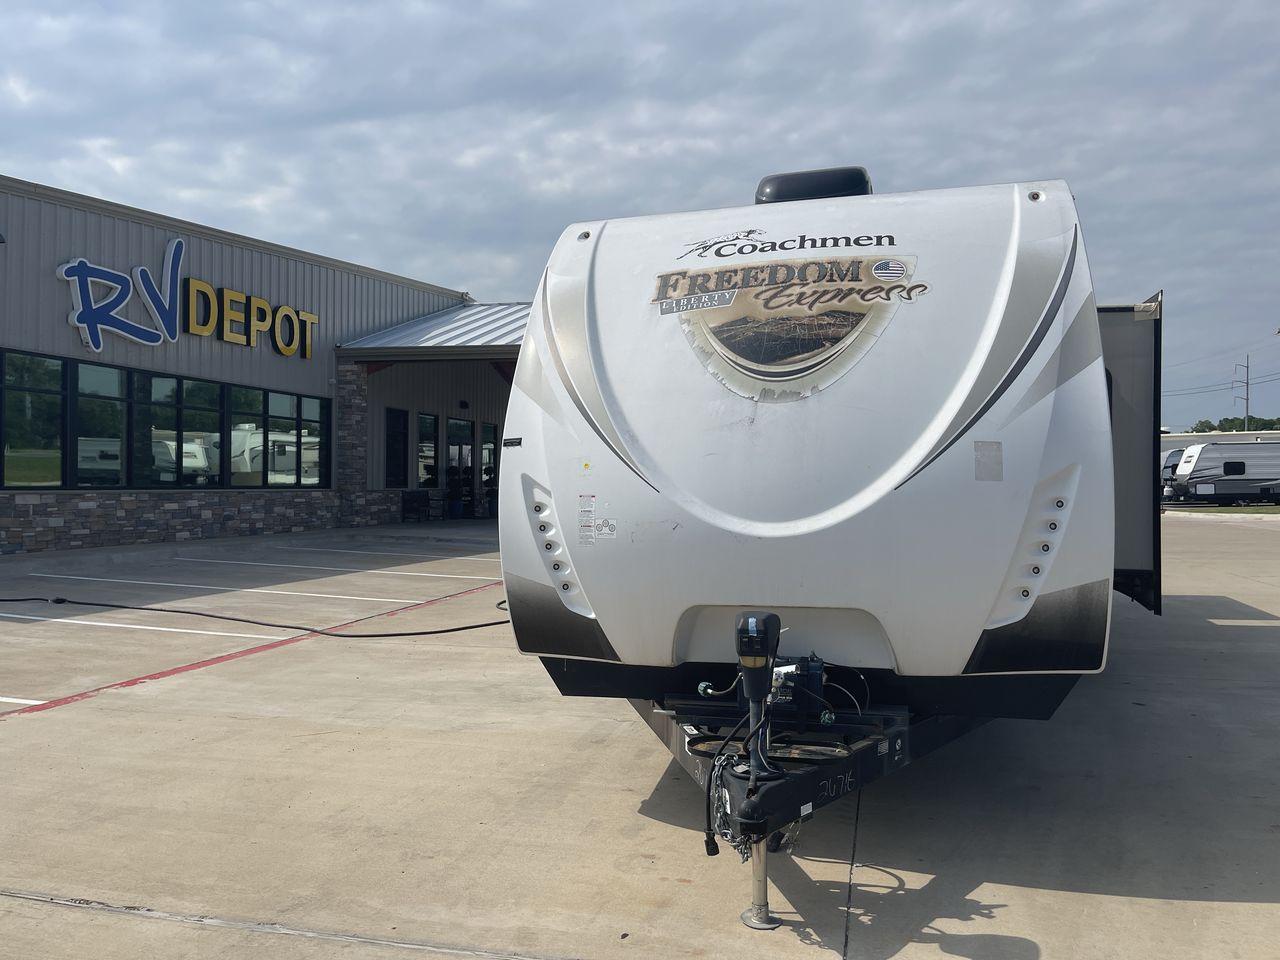 2017 TAN FOREST RIVER FREEDOM EXPRESS 320B (5ZT2FEXB6HA) , Length: 36.92 ft. | Dry Weight: 7,734 lbs. | Gross Weight: 10,700 lbs. | Slides: 3 transmission, located at 4319 N Main St, Cleburne, TX, 76033, (817) 678-5133, 32.385960, -97.391212 - If you are in the market for a spacious and comfortable travel trailer bunk house, then look no further than this 2017 FOREST RIVER FREEDOM EXPRESS 320B available for sale at RV Depot in Cleburne, TX. With its affordable price of $41,995, this RV is a great option for families or individuals looking - Photo #0